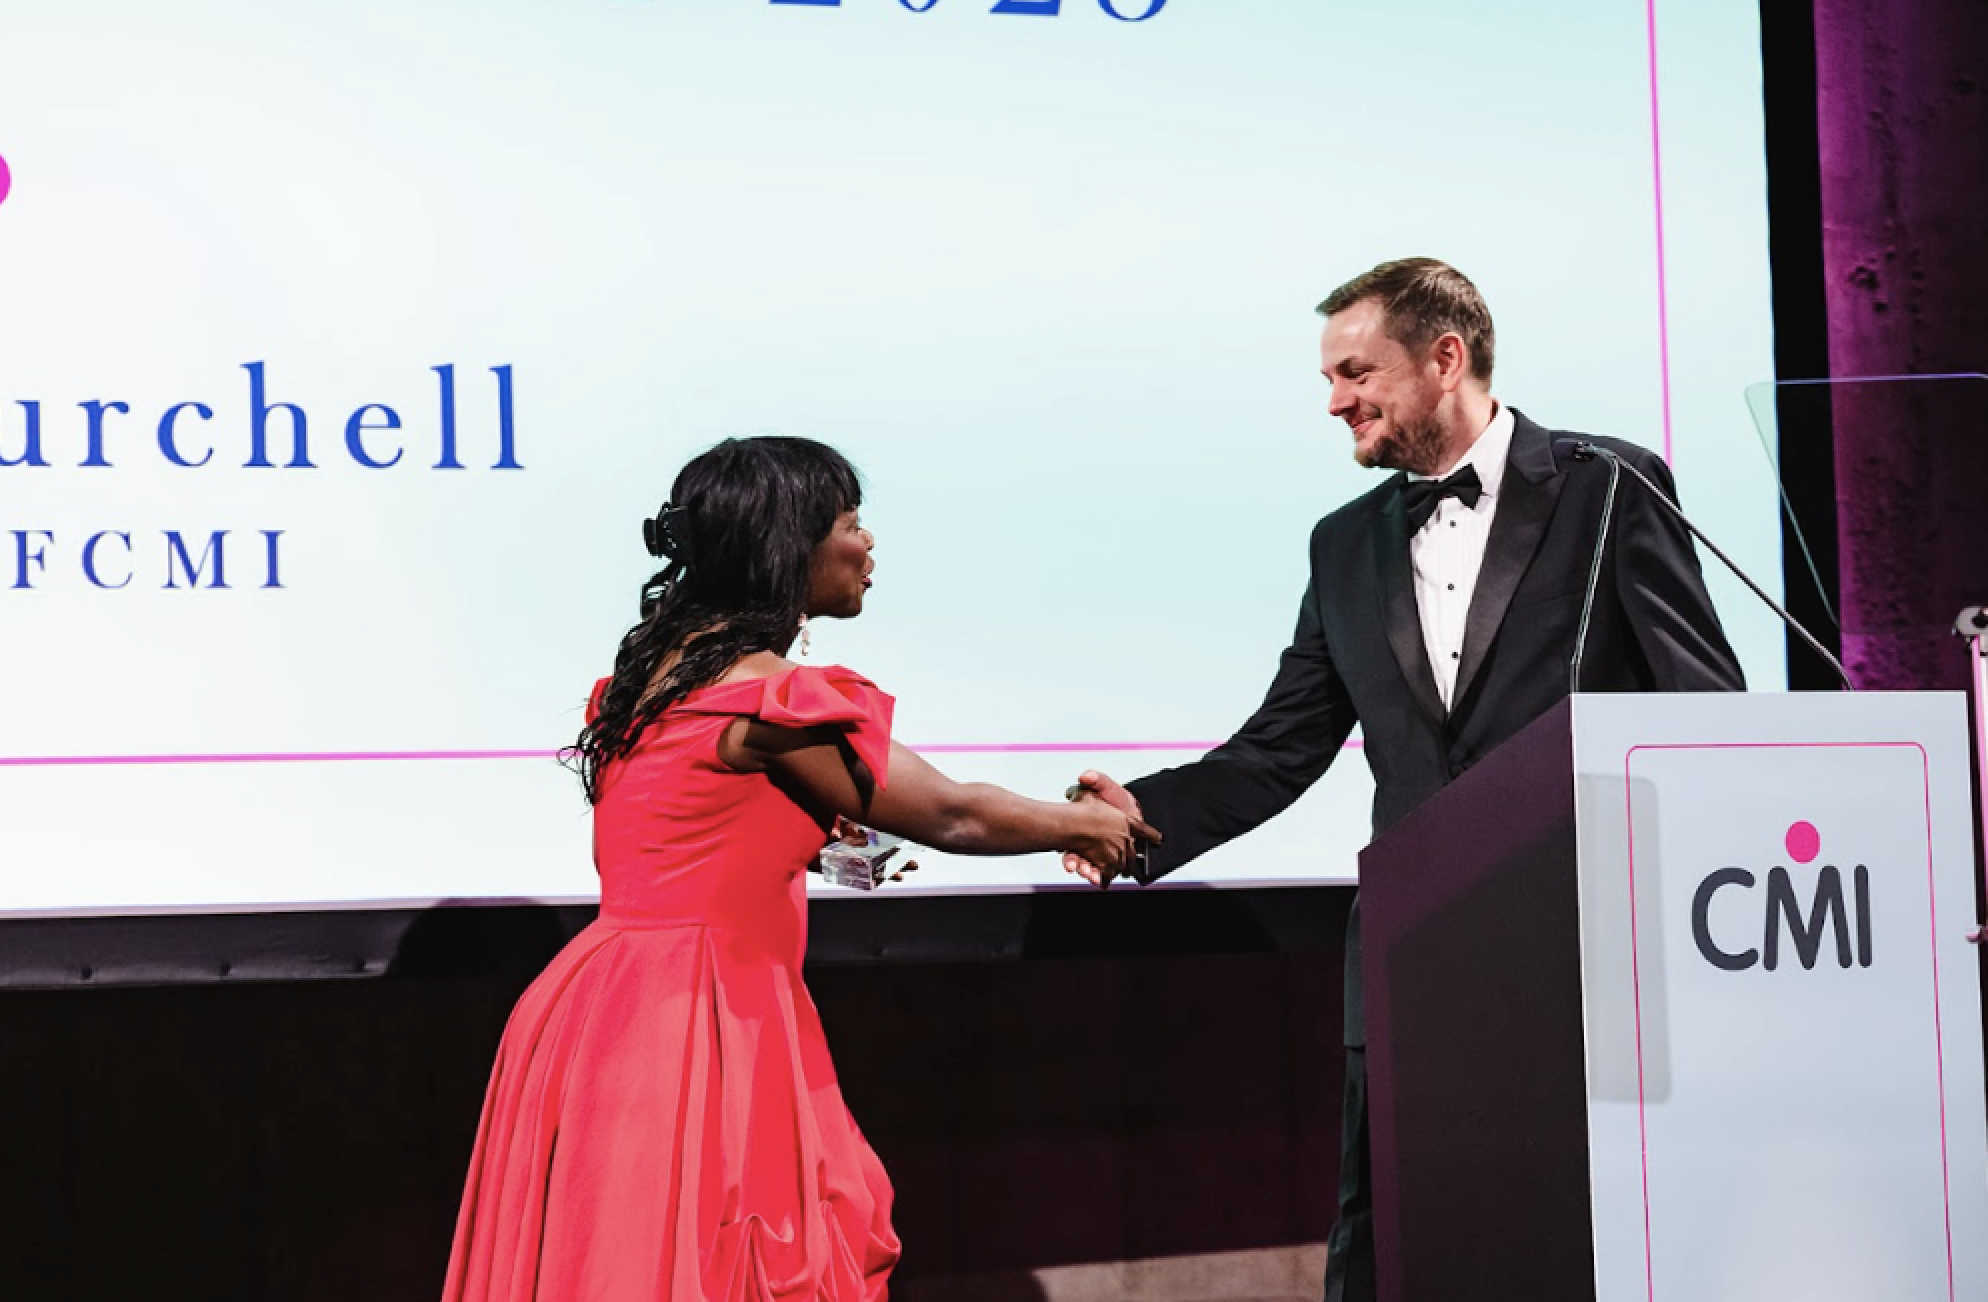 Two award winners shaking hands at last year's CMI President's Dinner